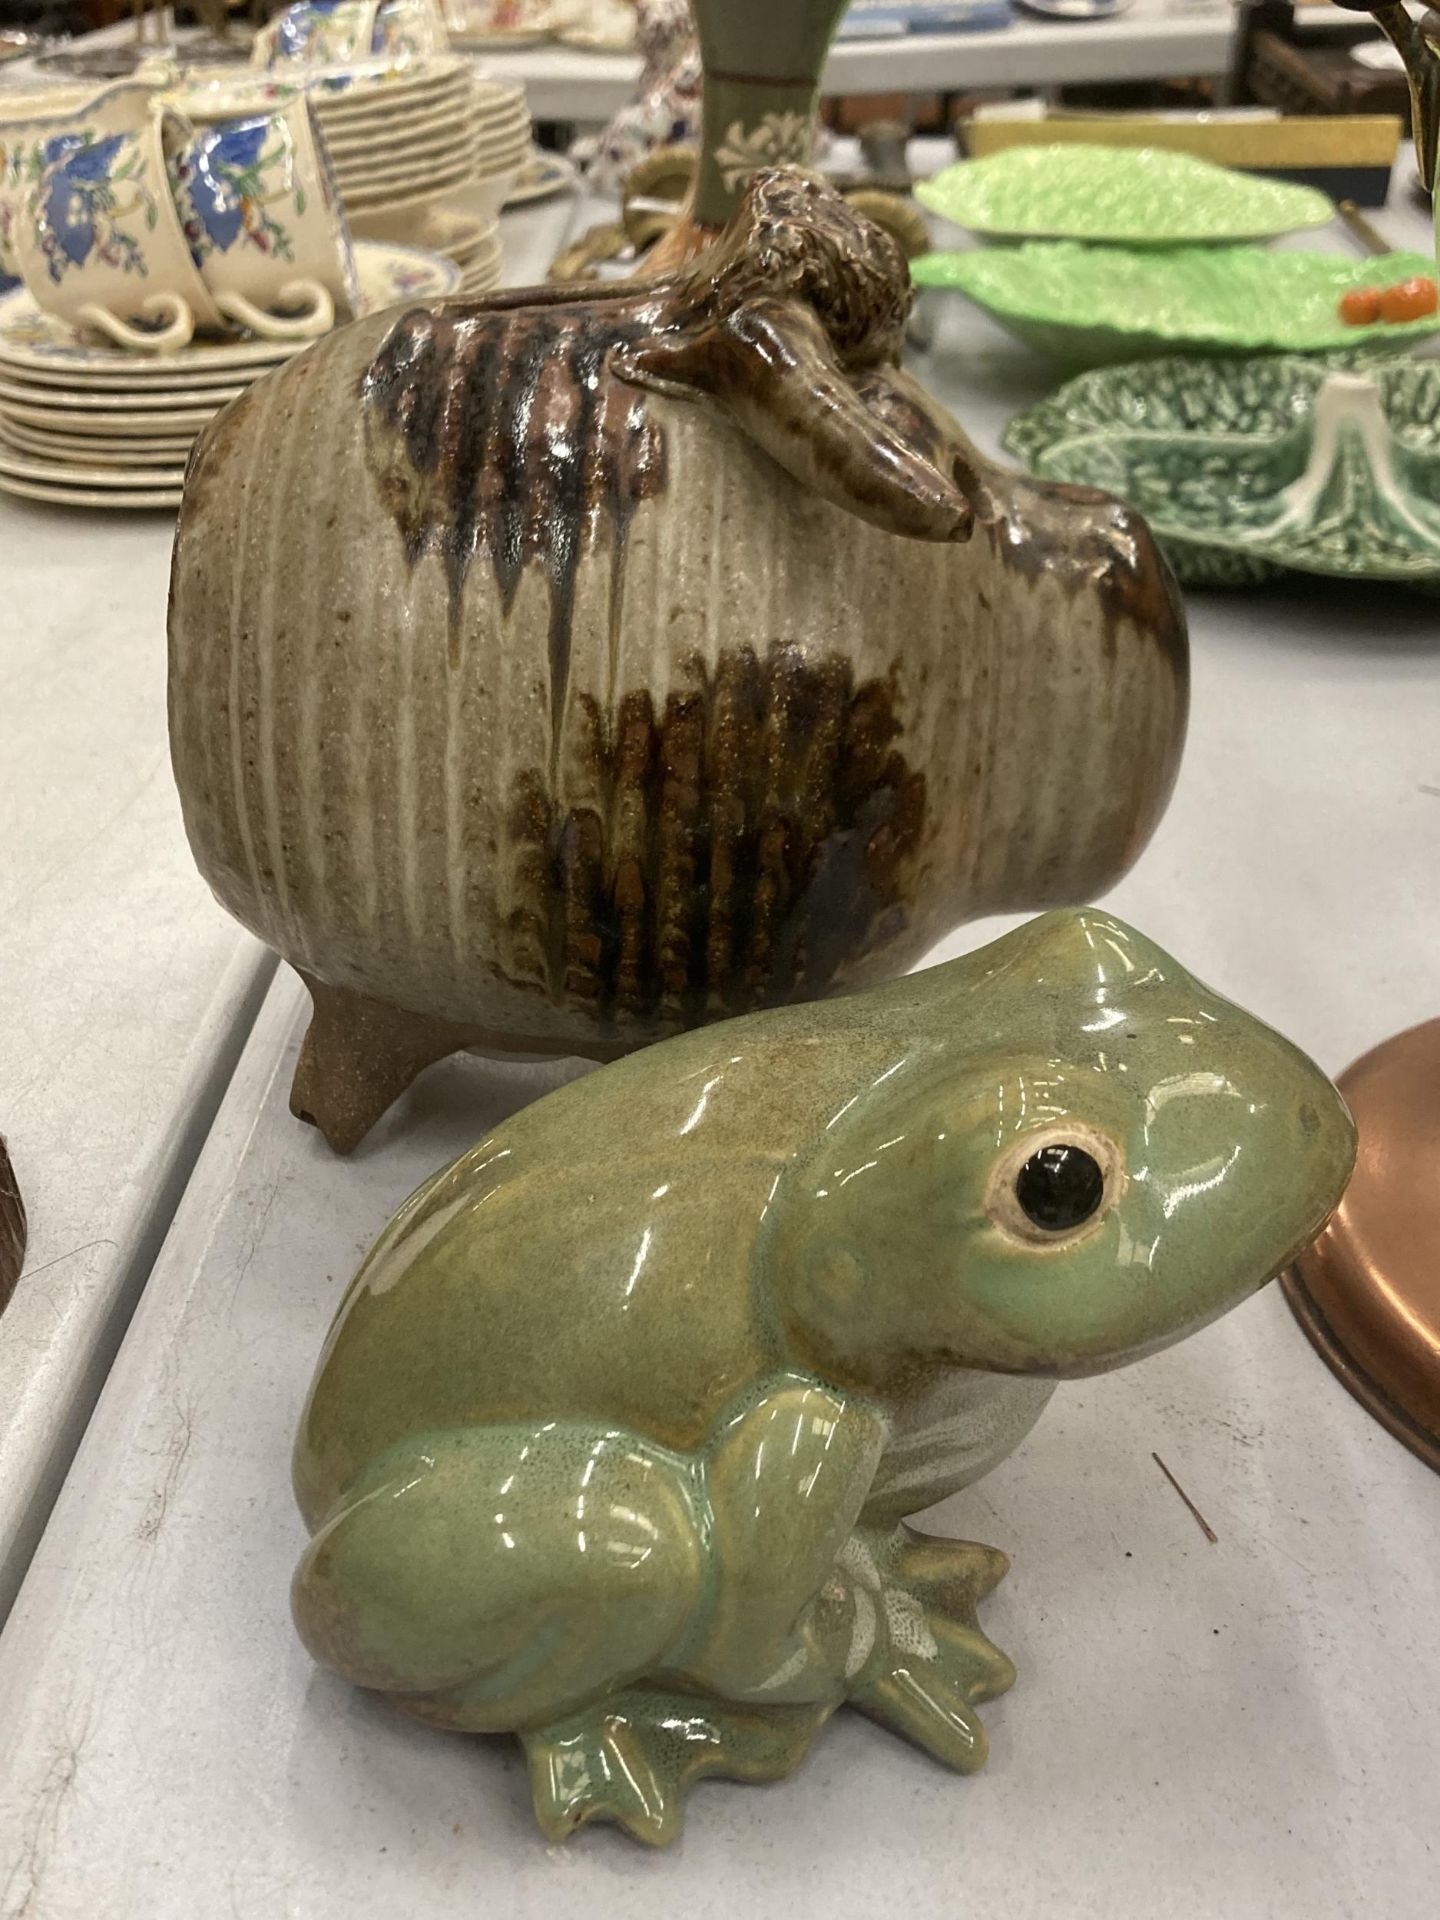 A LARGE STUDIO POTTERY MONEY PIG PLUS A FROG ORNAMENT - Image 2 of 3